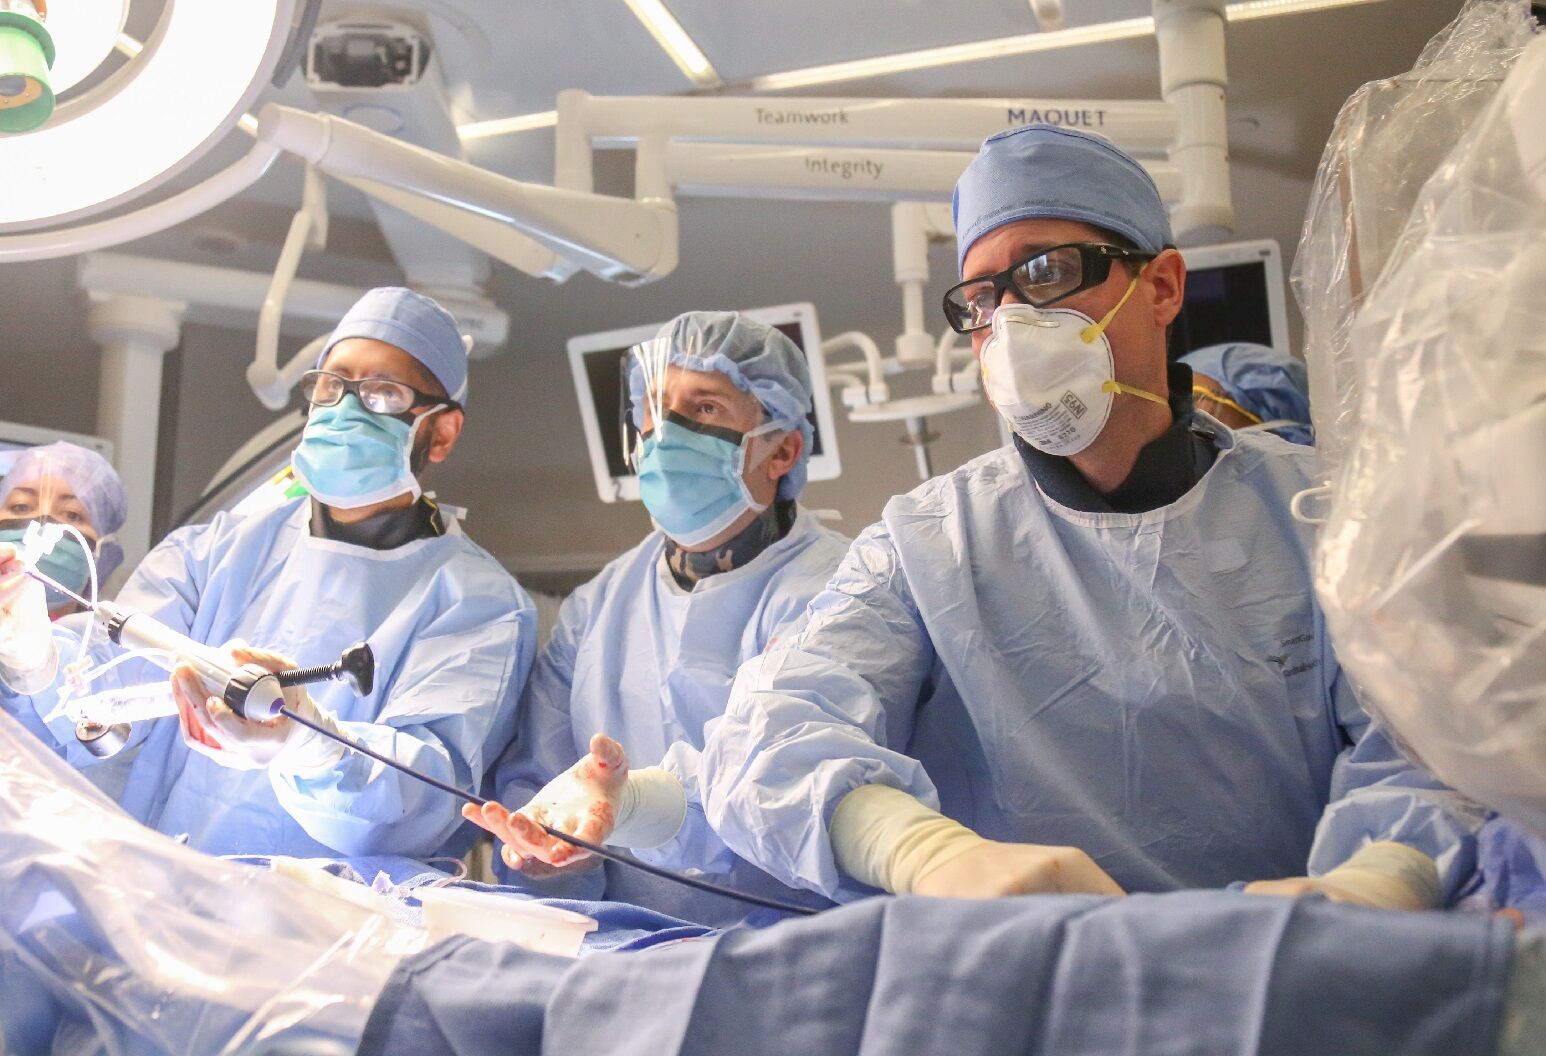 A group of three surgeons in full surgical attire standing over a patient look over at something out of frame.